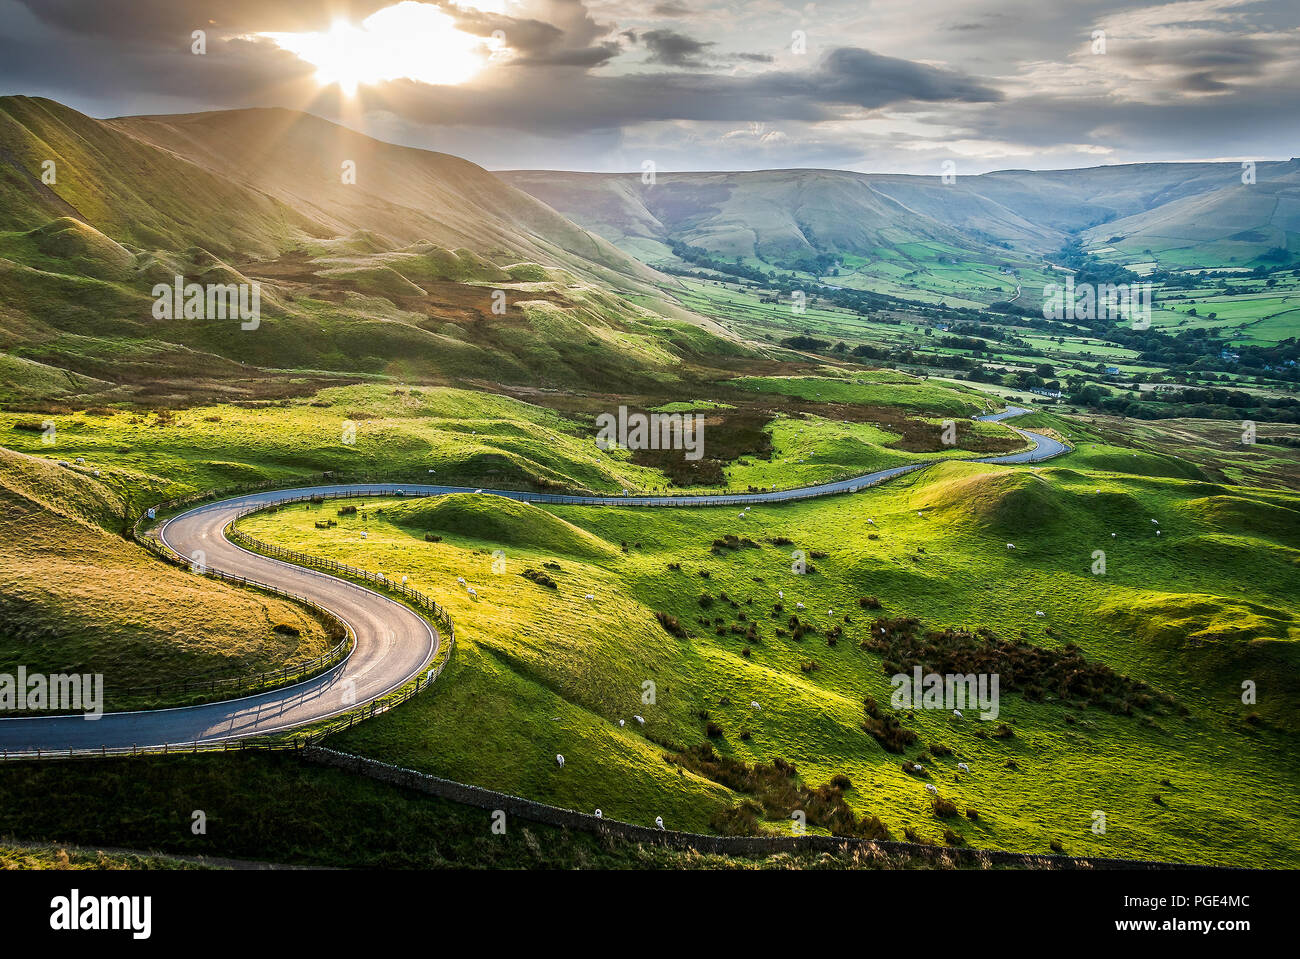 Sunset at Mam Tor, Peak District National Park, with a view along the winding road down to Hope Valey, in Derbyshire, England. Flock of sheep grazing. Stock Photo